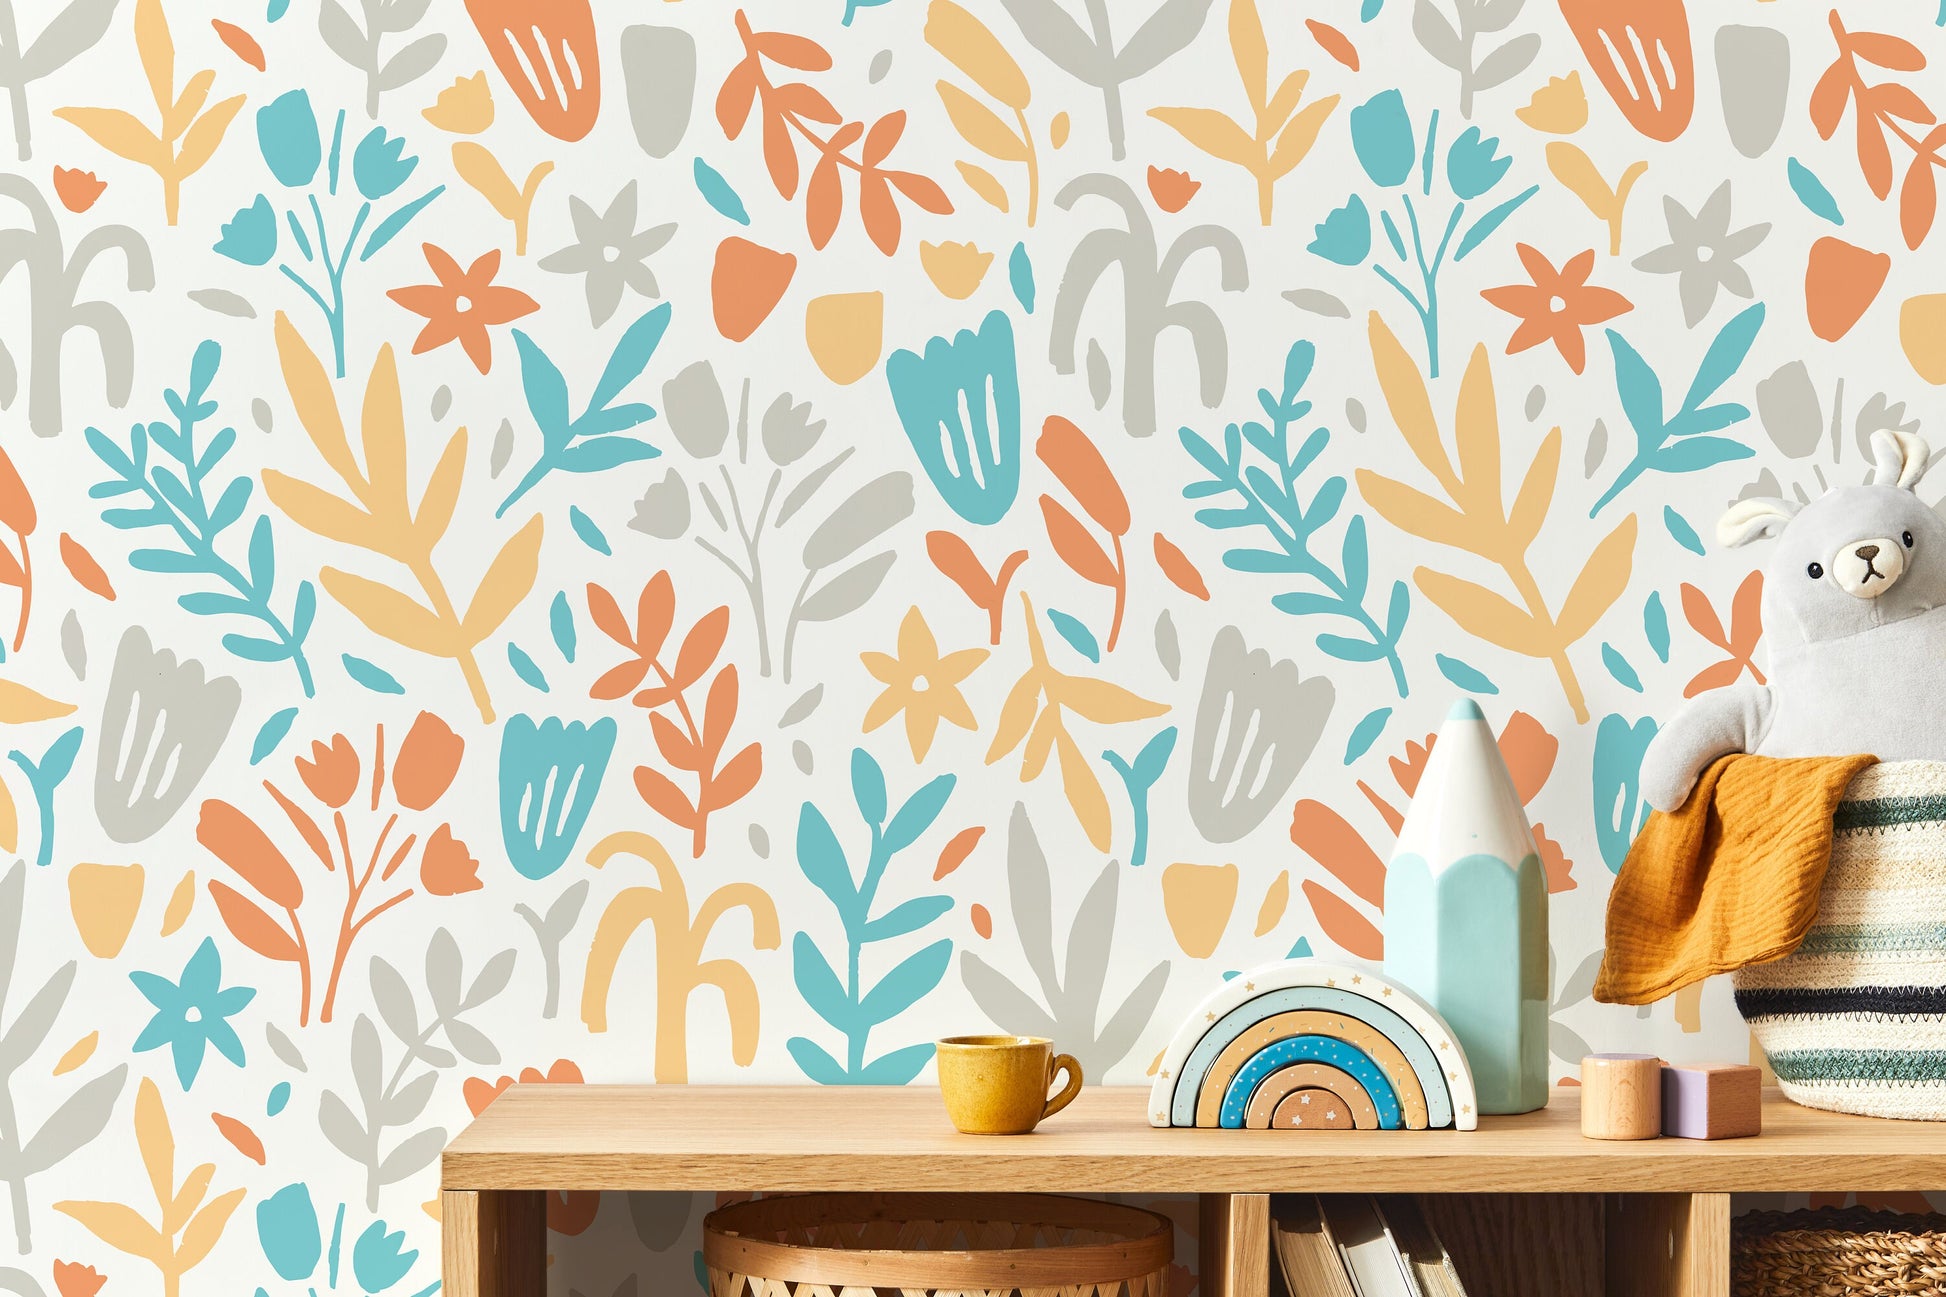 Colorful Floral Wallpaper / Peel and Stick Wallpaper Removable Wallpaper Home Decor Wall Art Wall Decor Room Decor - D369